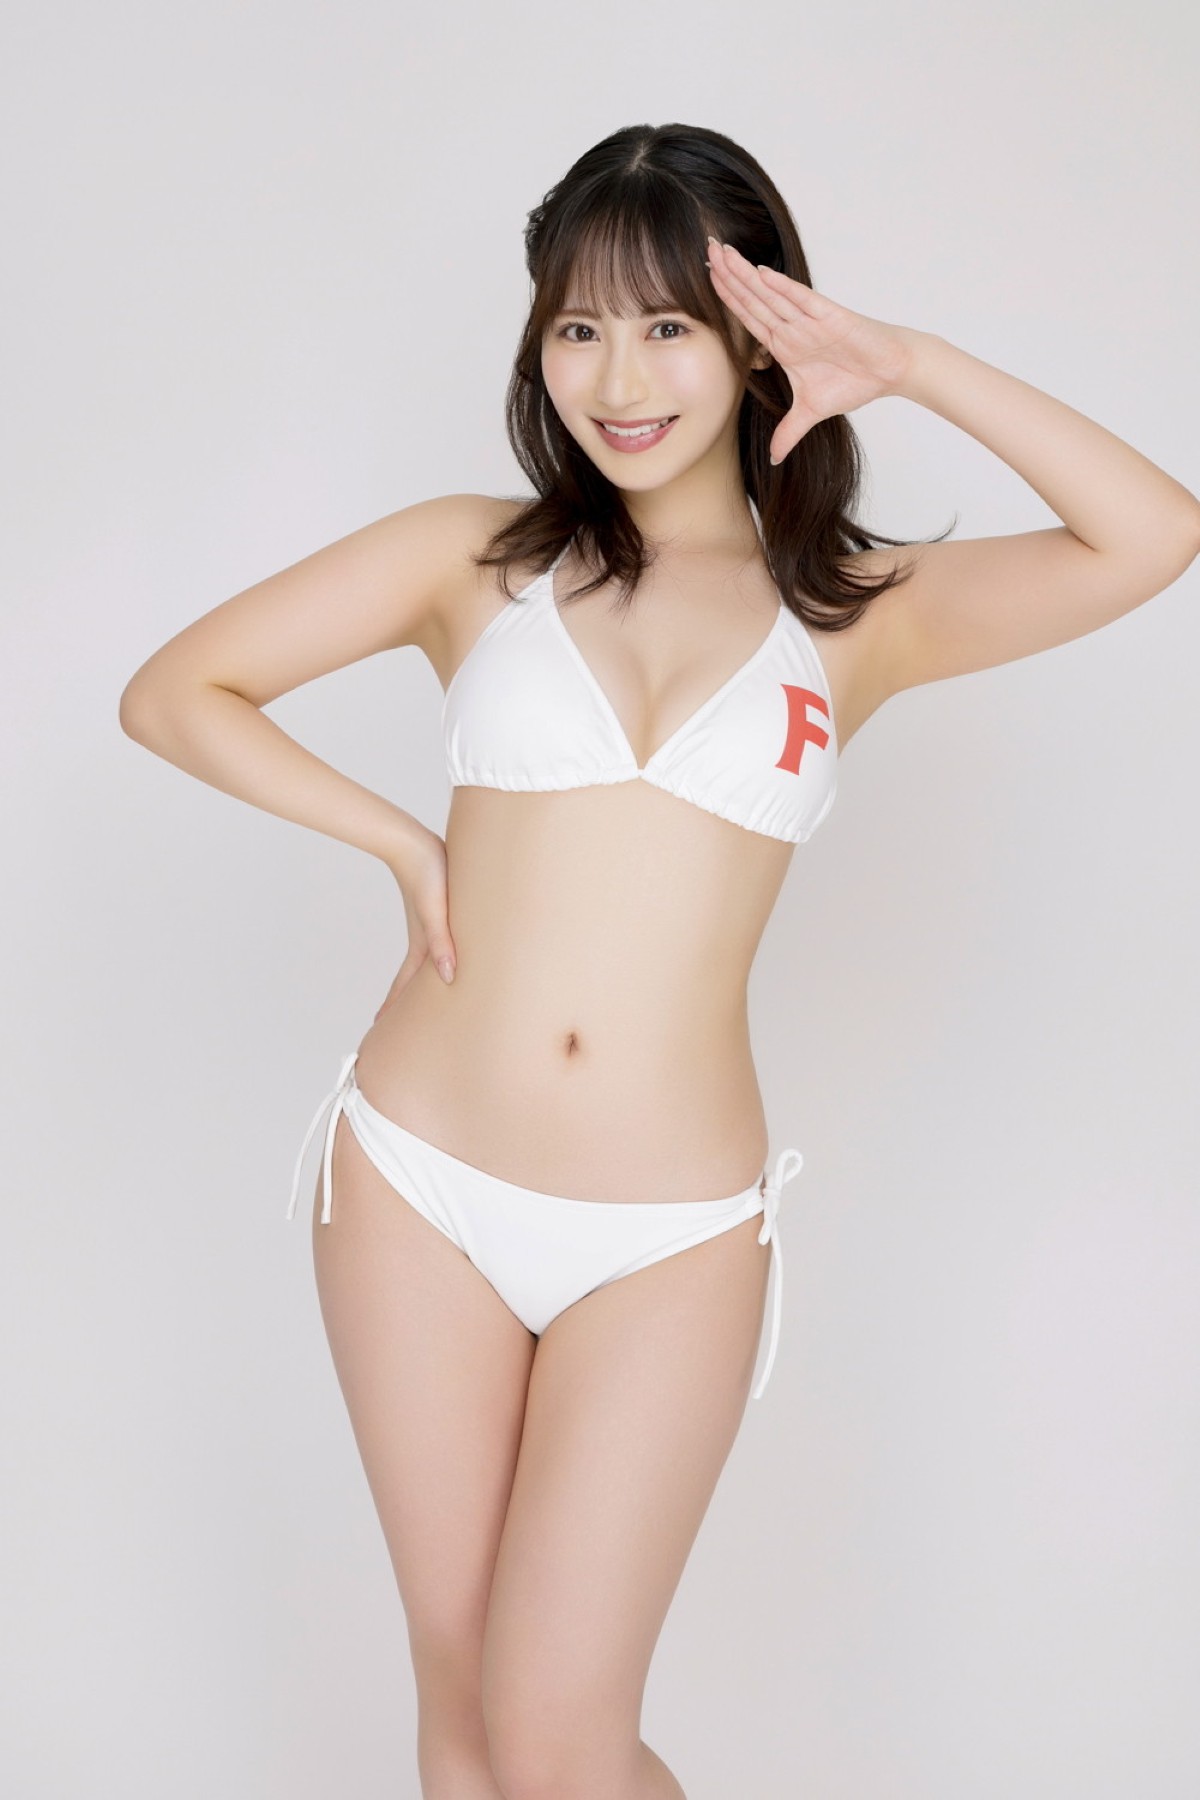 Photobook 2023 01 18 Miru And 5 others New Year Is Eve Super Campaign 2022 2023 Sexy Collection 0063 7456215769.jpg